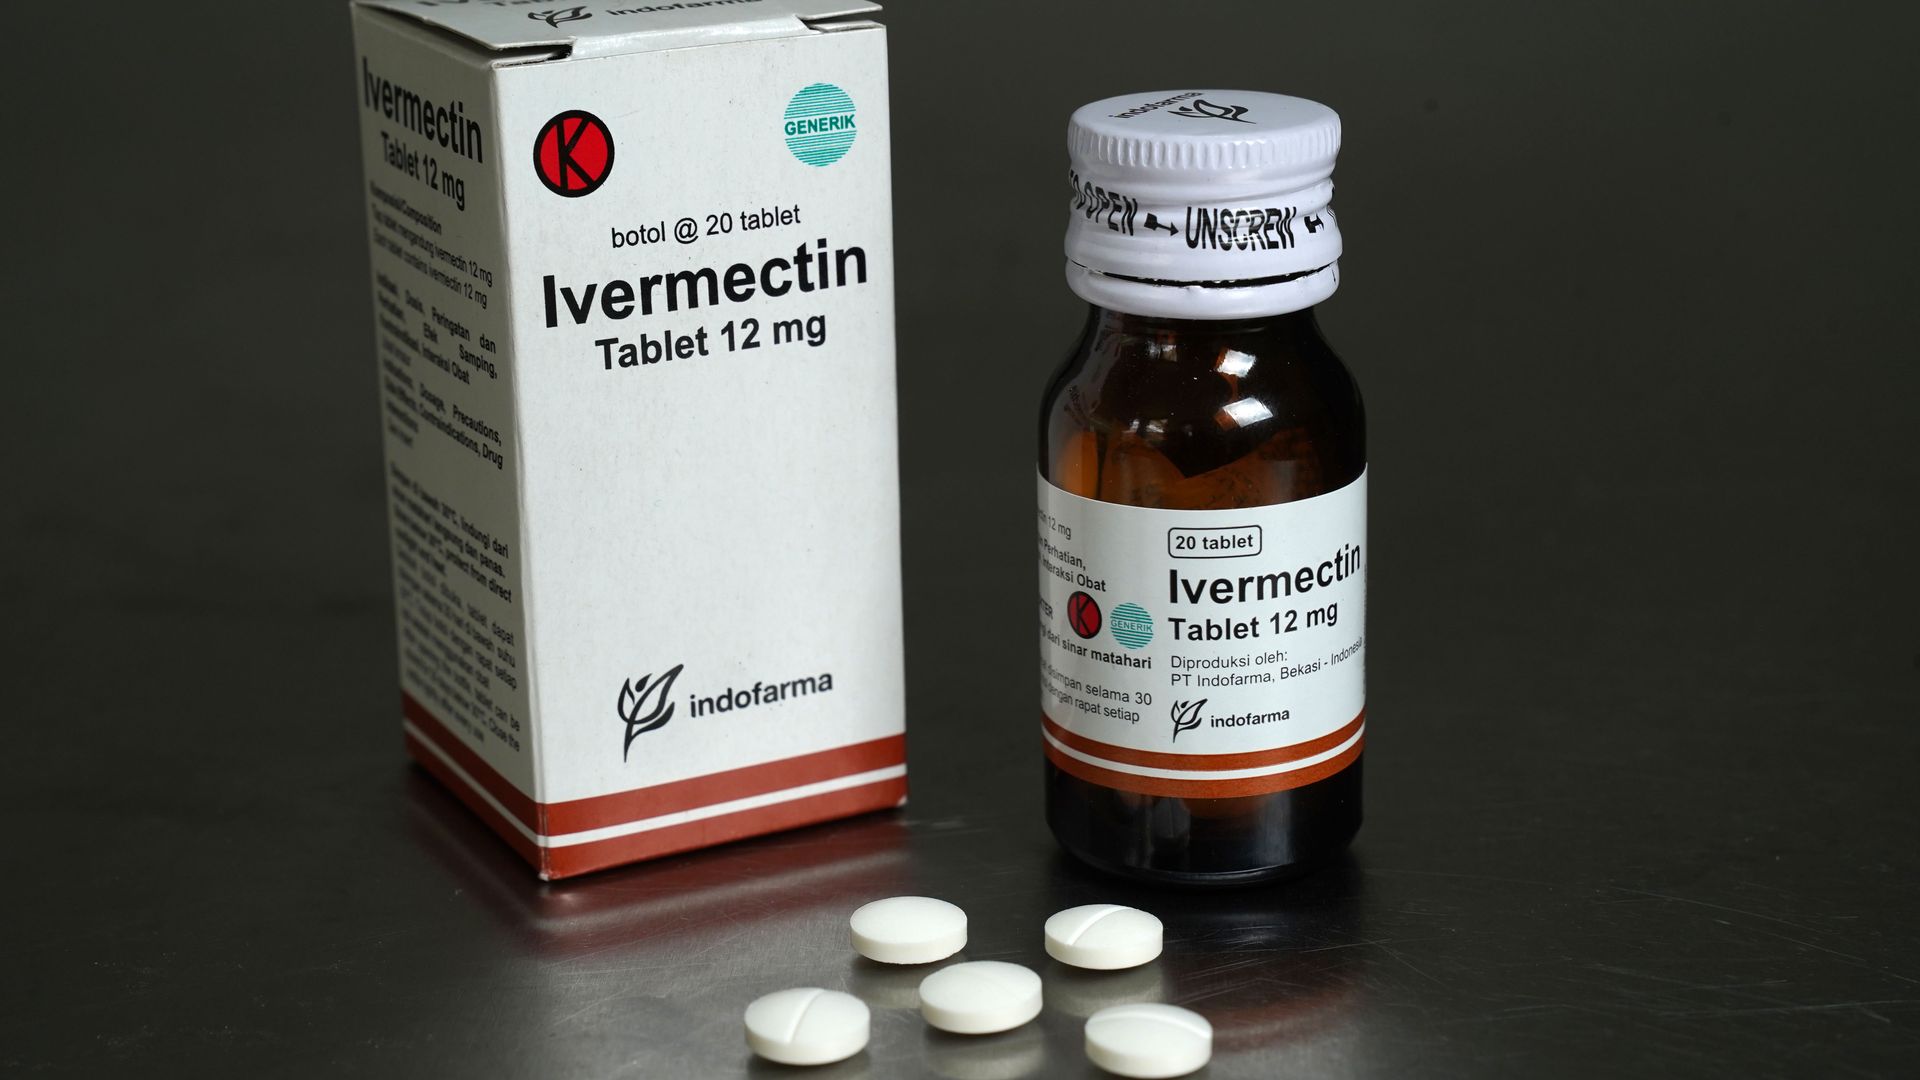 Effect of Early Treatment with Ivermectin among Patients with Covid-19